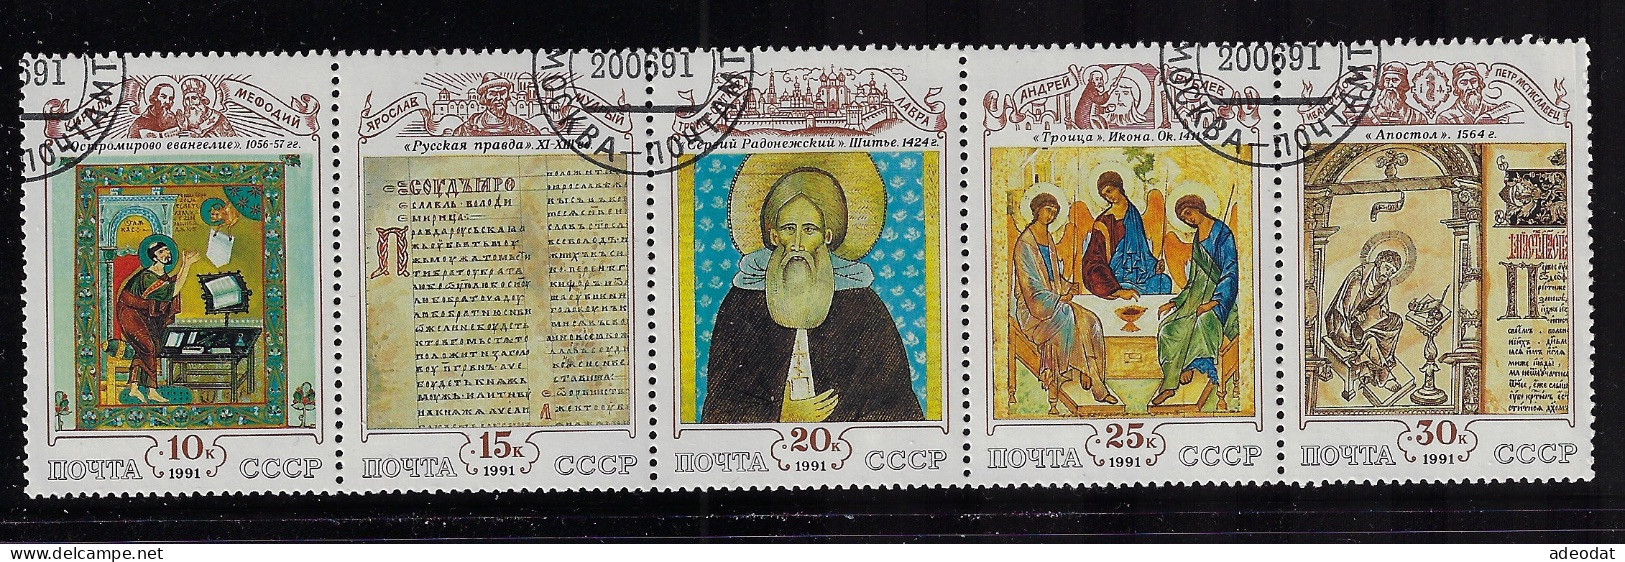 RUSSIA 1991 SCOTT #6004-6008   USED - Used Stamps